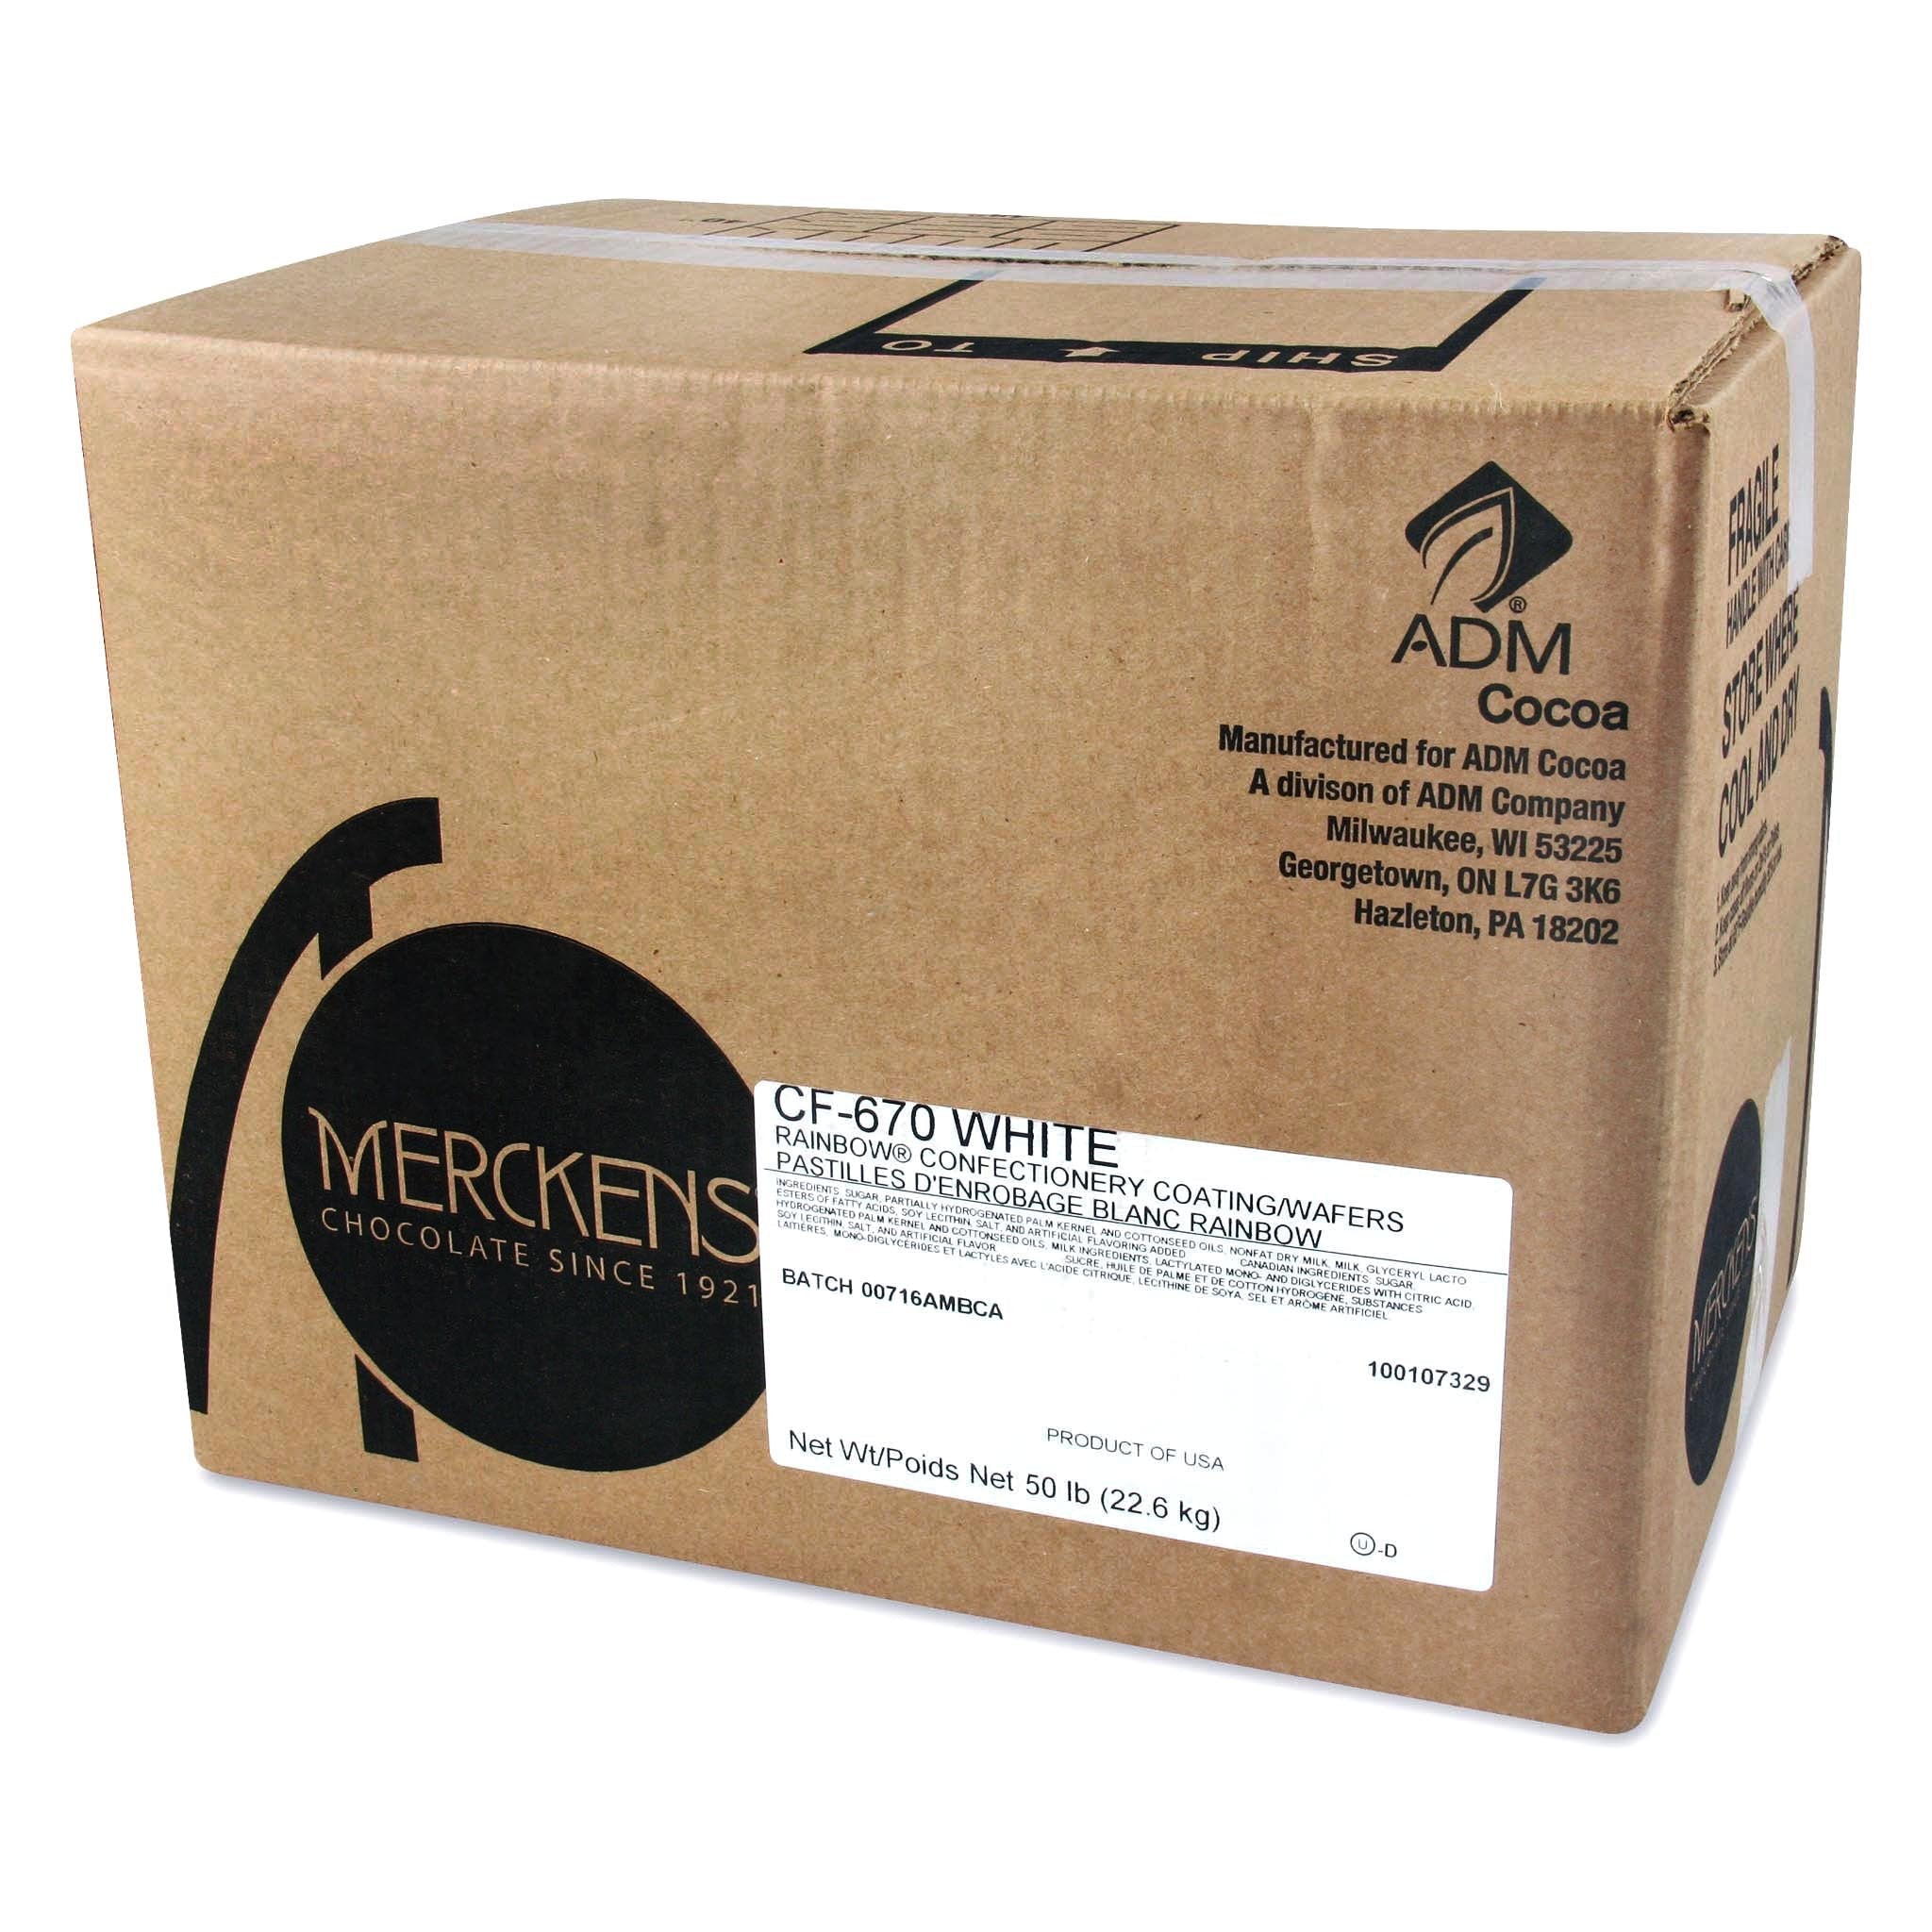 Merckens 5 LB MELTING COATING WAFERS Chocolate Candy Melts Cocoa Milk Dark  White